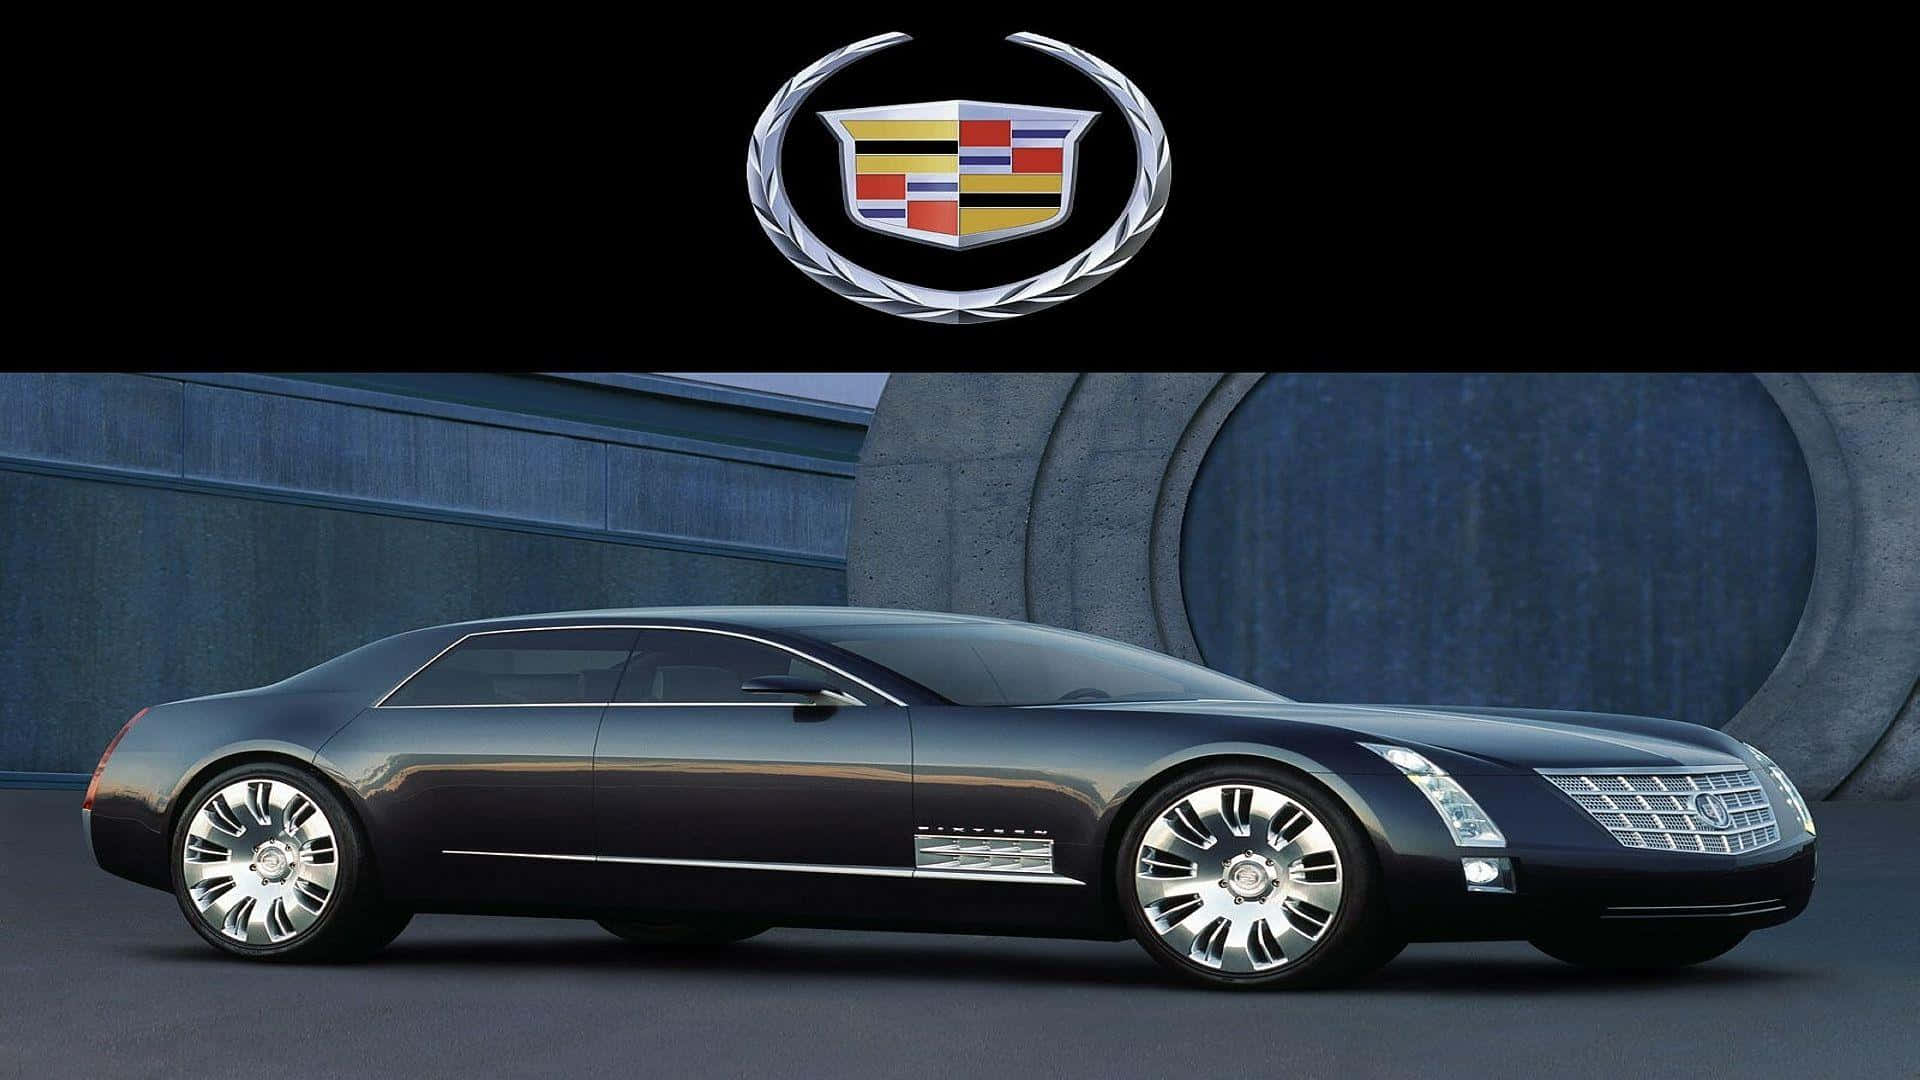 "Cruise in Style with Cadillac"